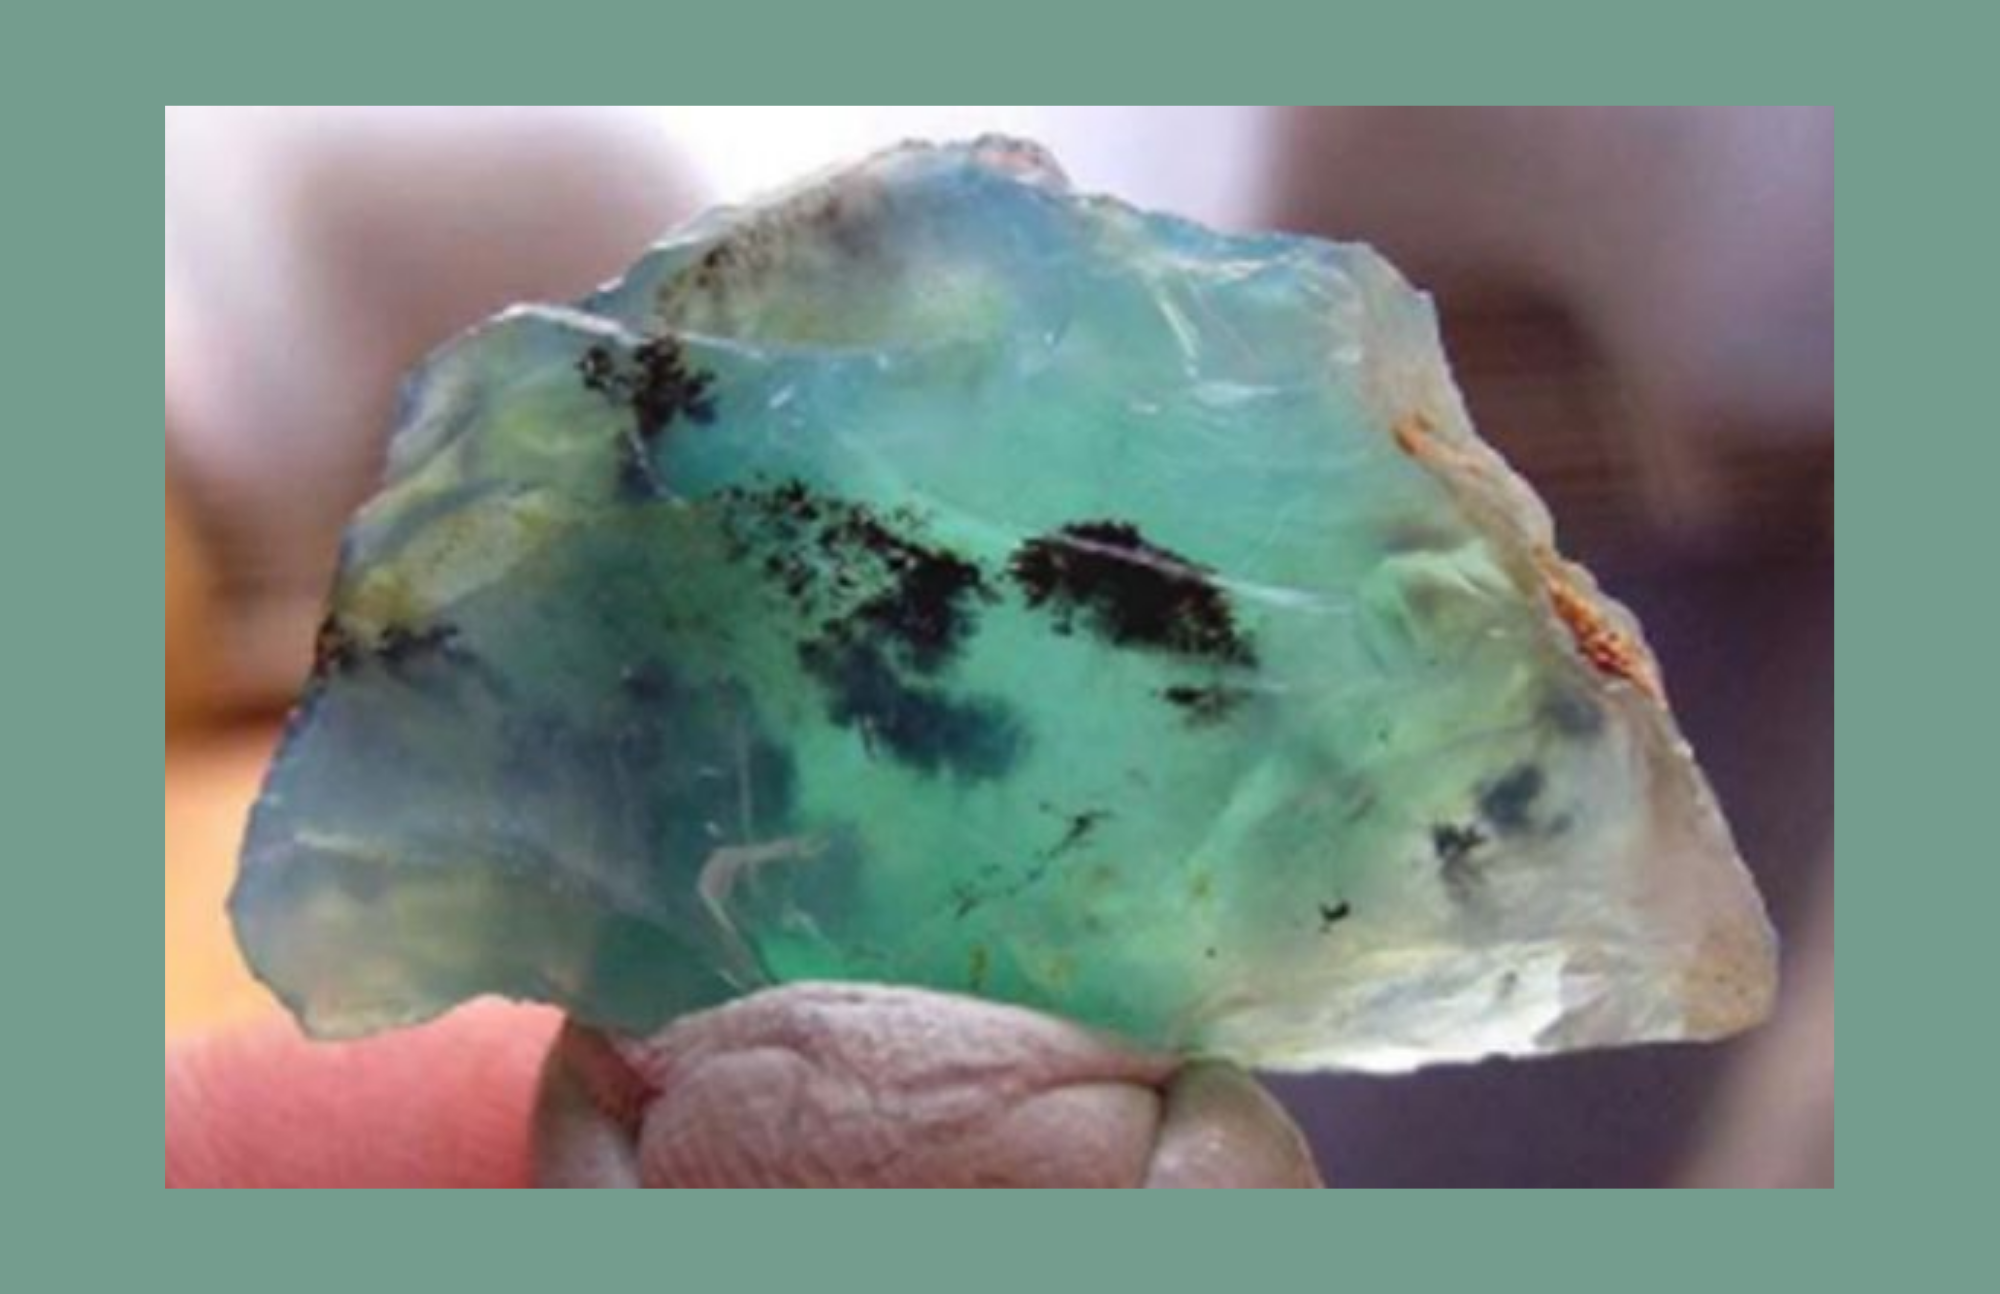 Peruvian Blue Opal stone with a mix of blue and green color